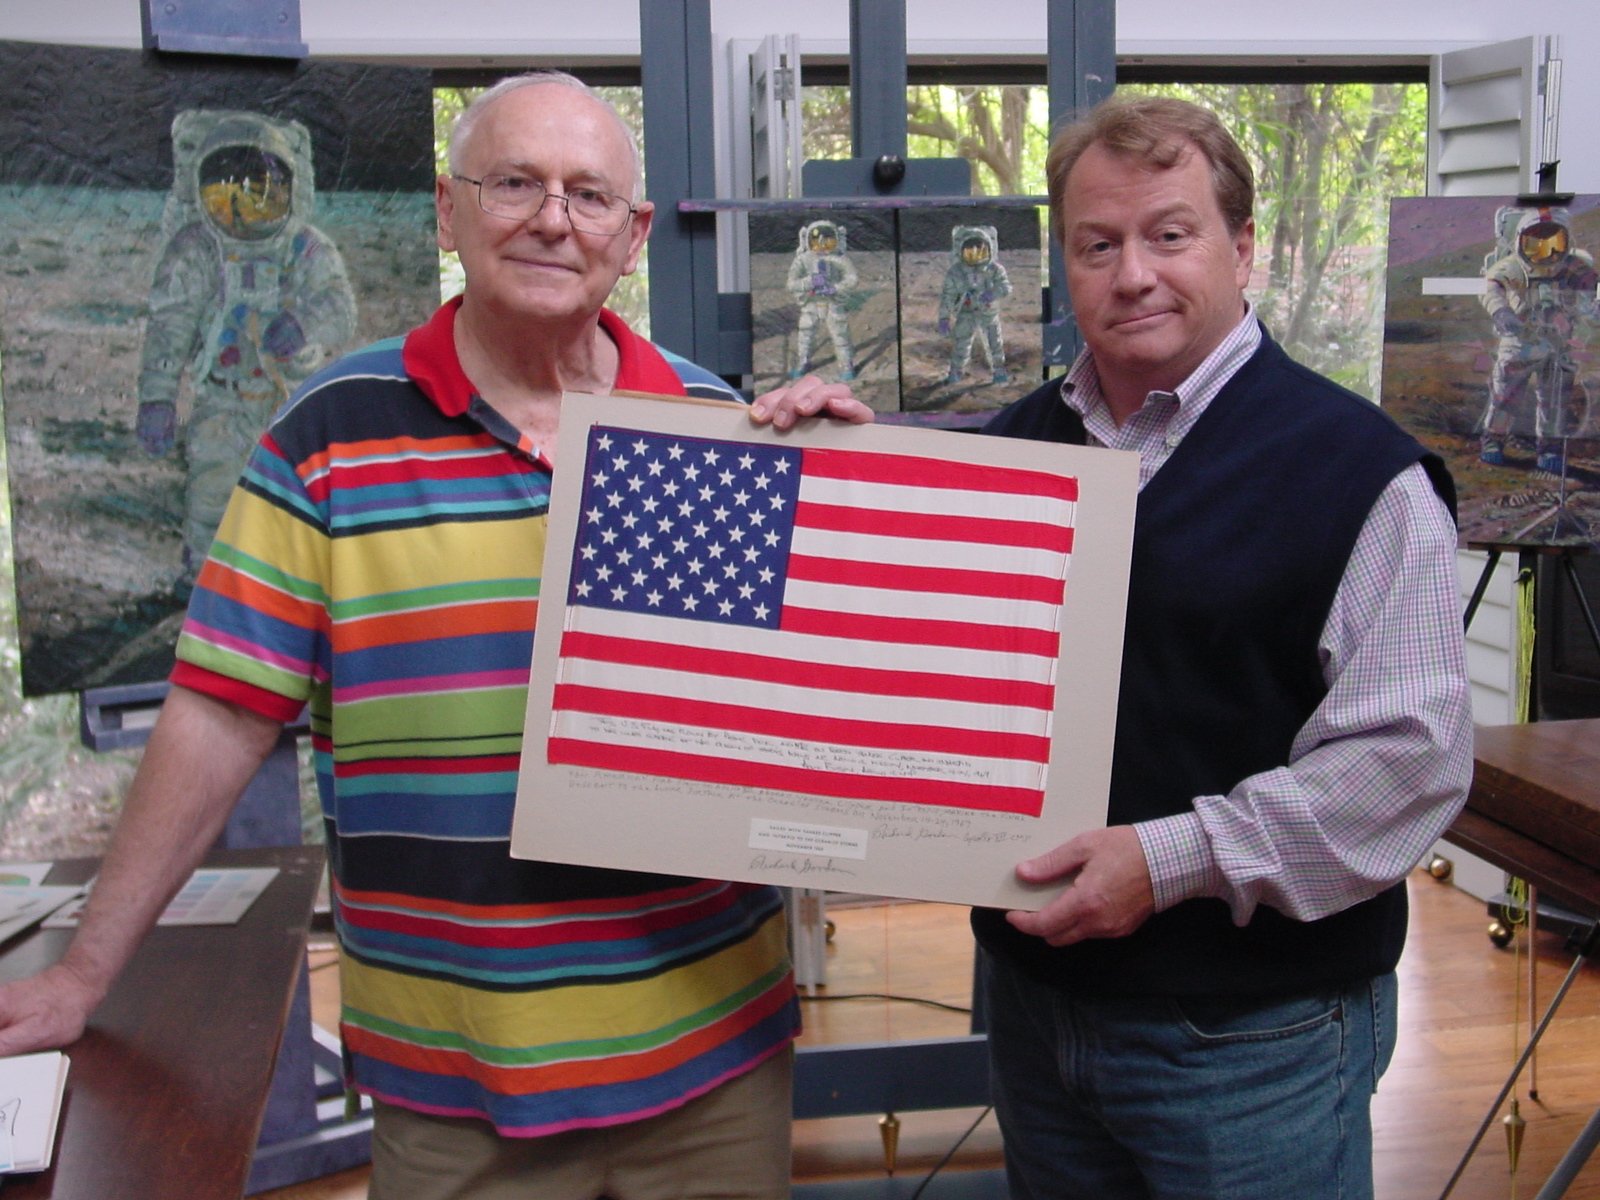 [Al+and+me+holding+large+A12+flag.jpg]